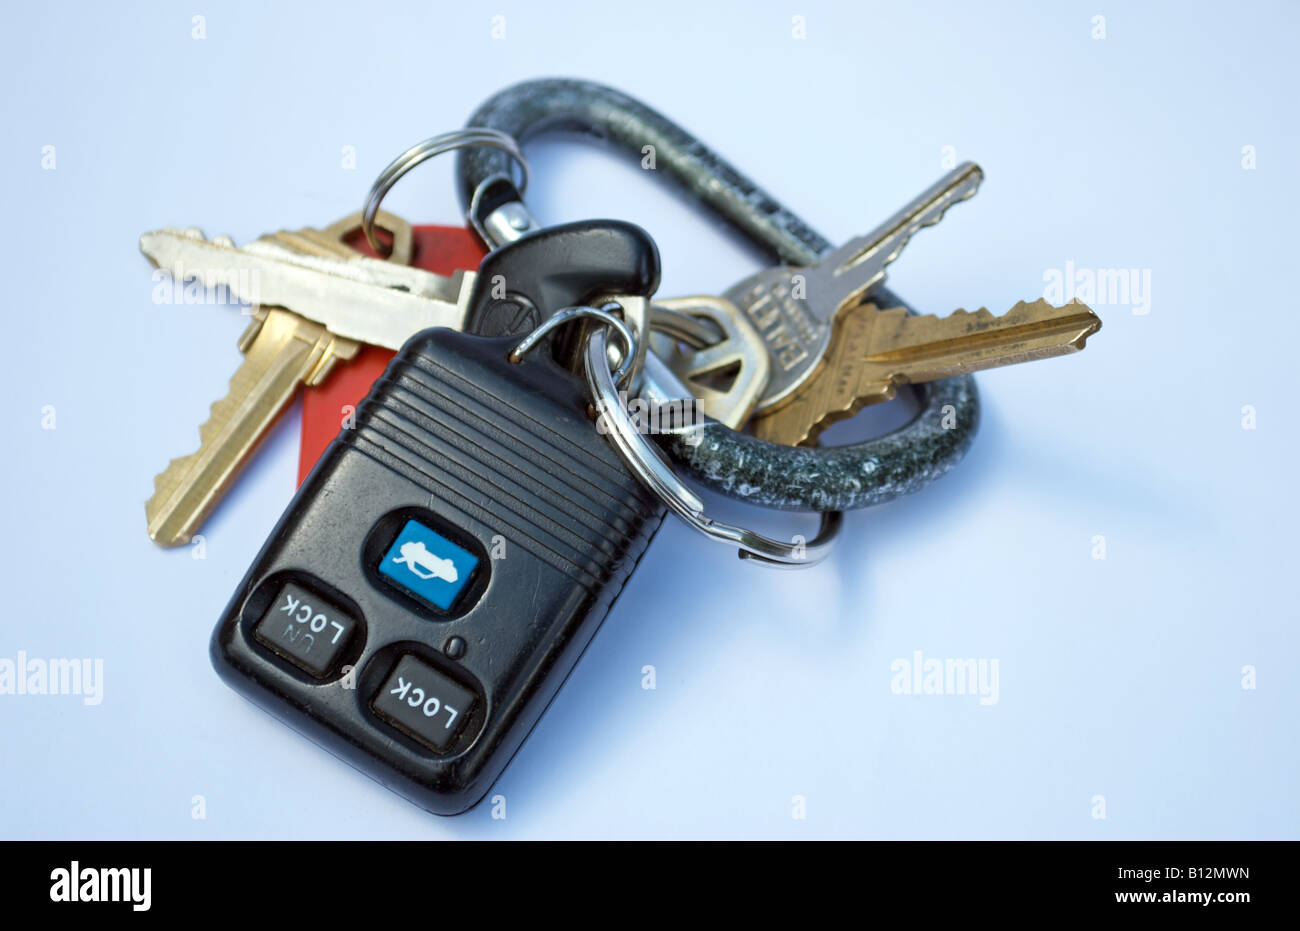 car keys and an car lock and unlock remote used to unlock the car from a distance Stock Photo